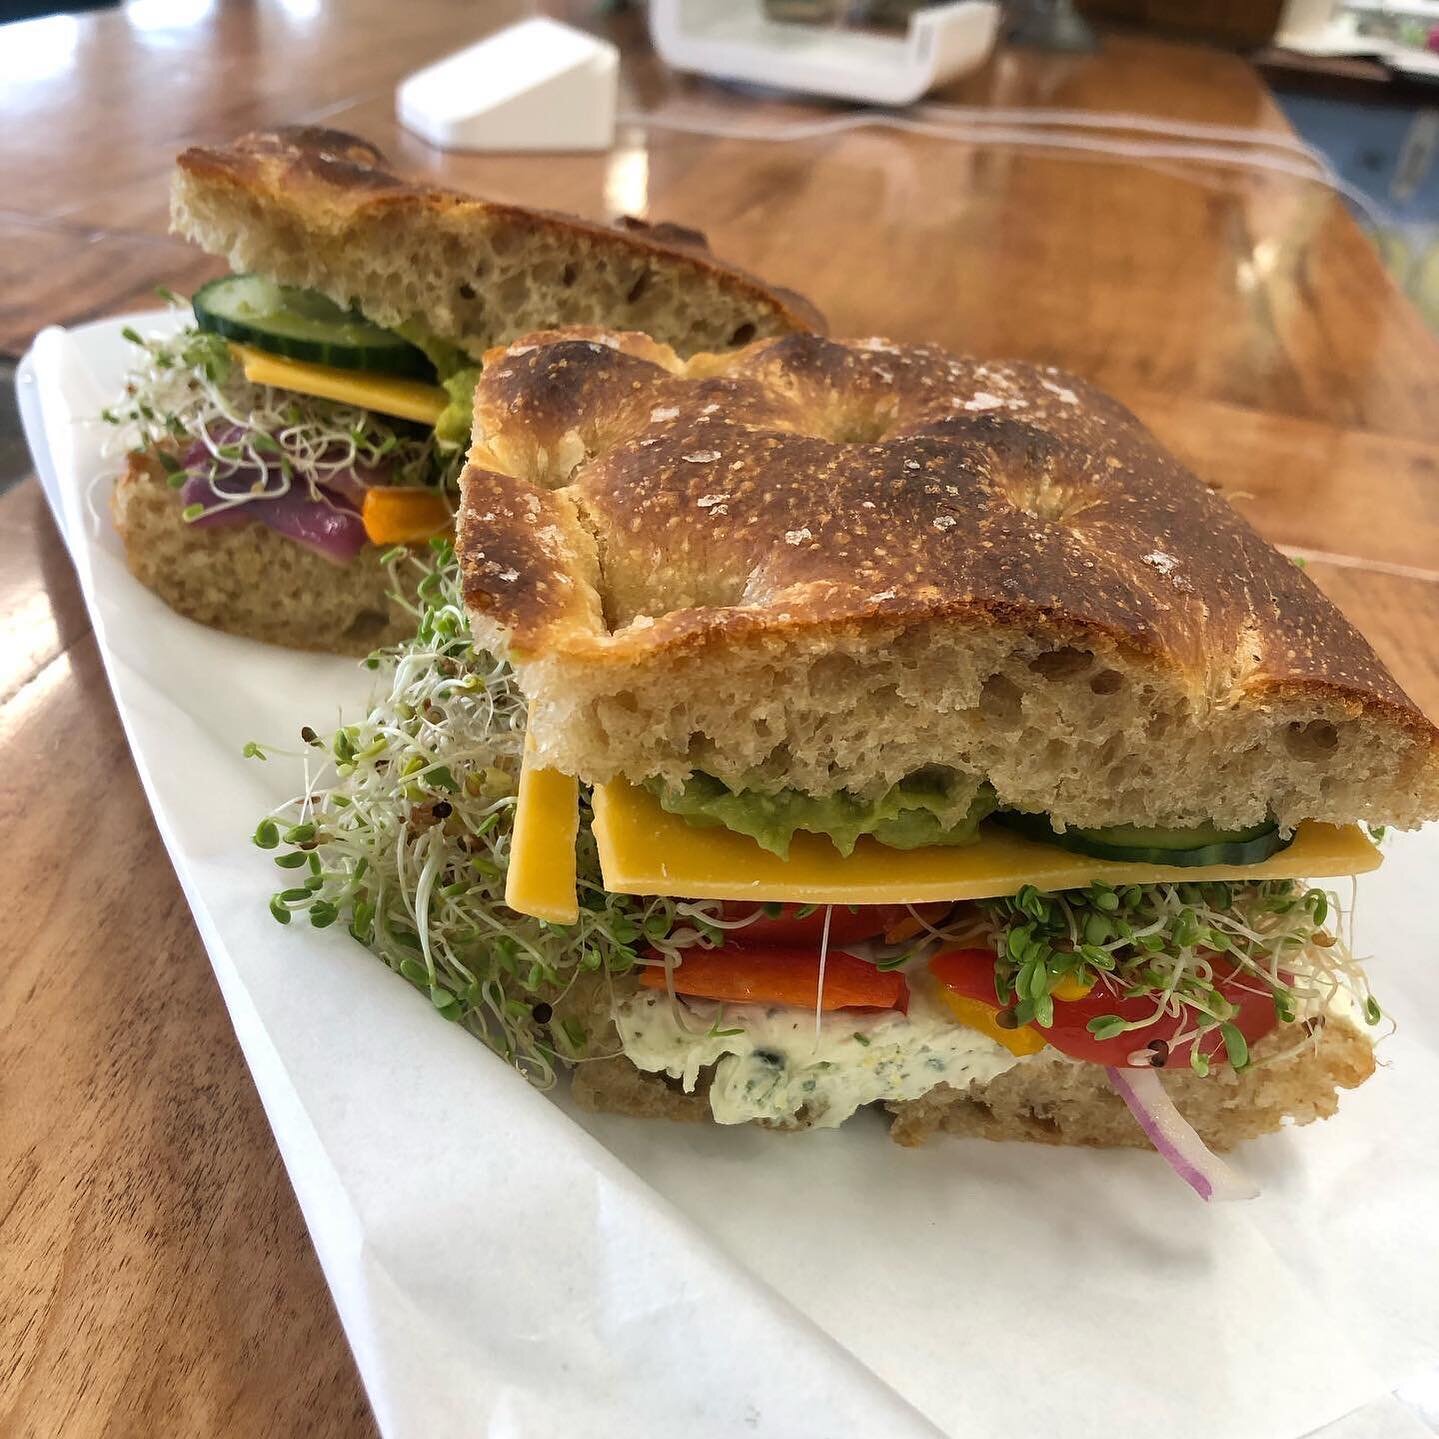 Veggie sandwiches on house made focaccia today ❤️ with herb cream cheese 

Sourdough specials: polenta pumpkin seed, honey whole wheat, caraway rye

#montanasourdough 
#helenamt